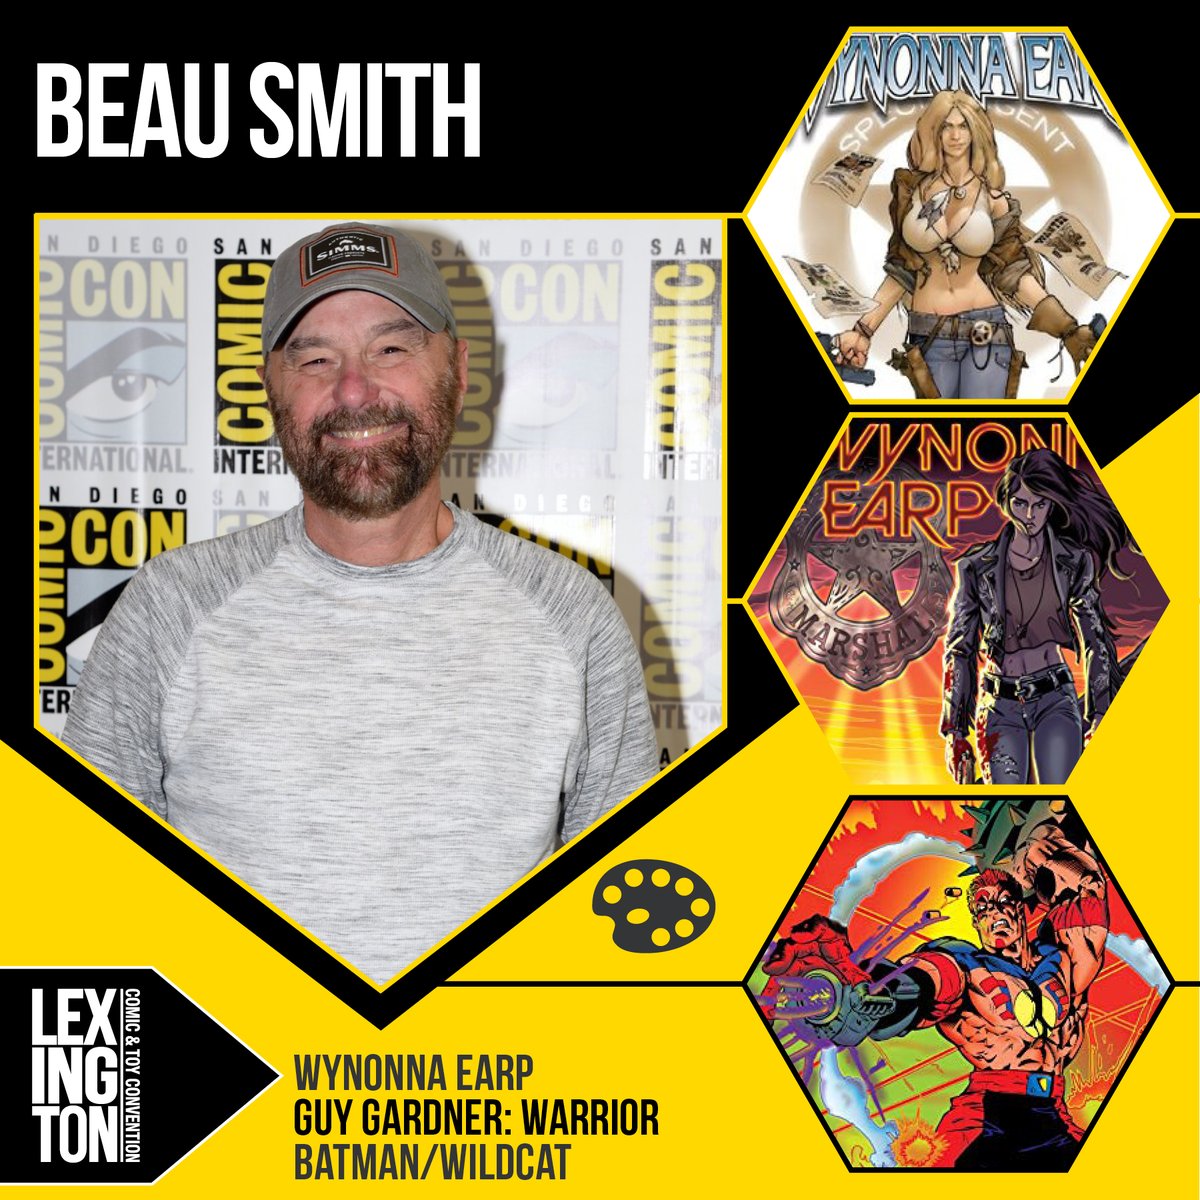 Lexington Comic & Toy Convention on X: #LCTC2023 Guest Announcement -  DANHAUSEN will be coming to join us for the Lexington Comic & Toy Con this  March 23 - 26th in Lexington